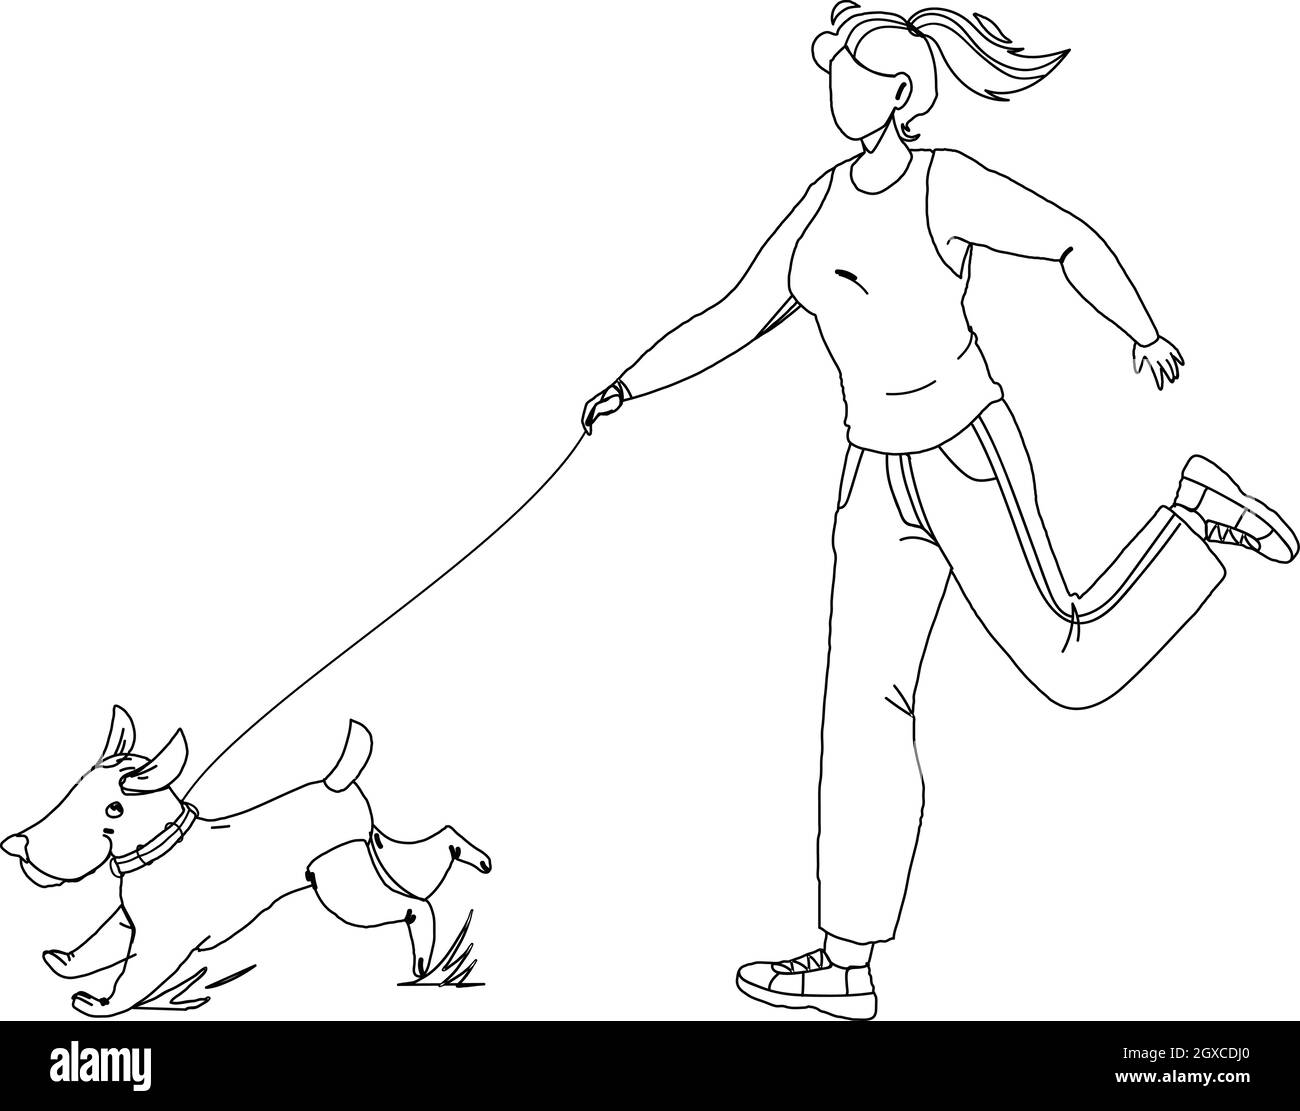 Pet Walking And Running In Park With Girl Vector Stock Vector